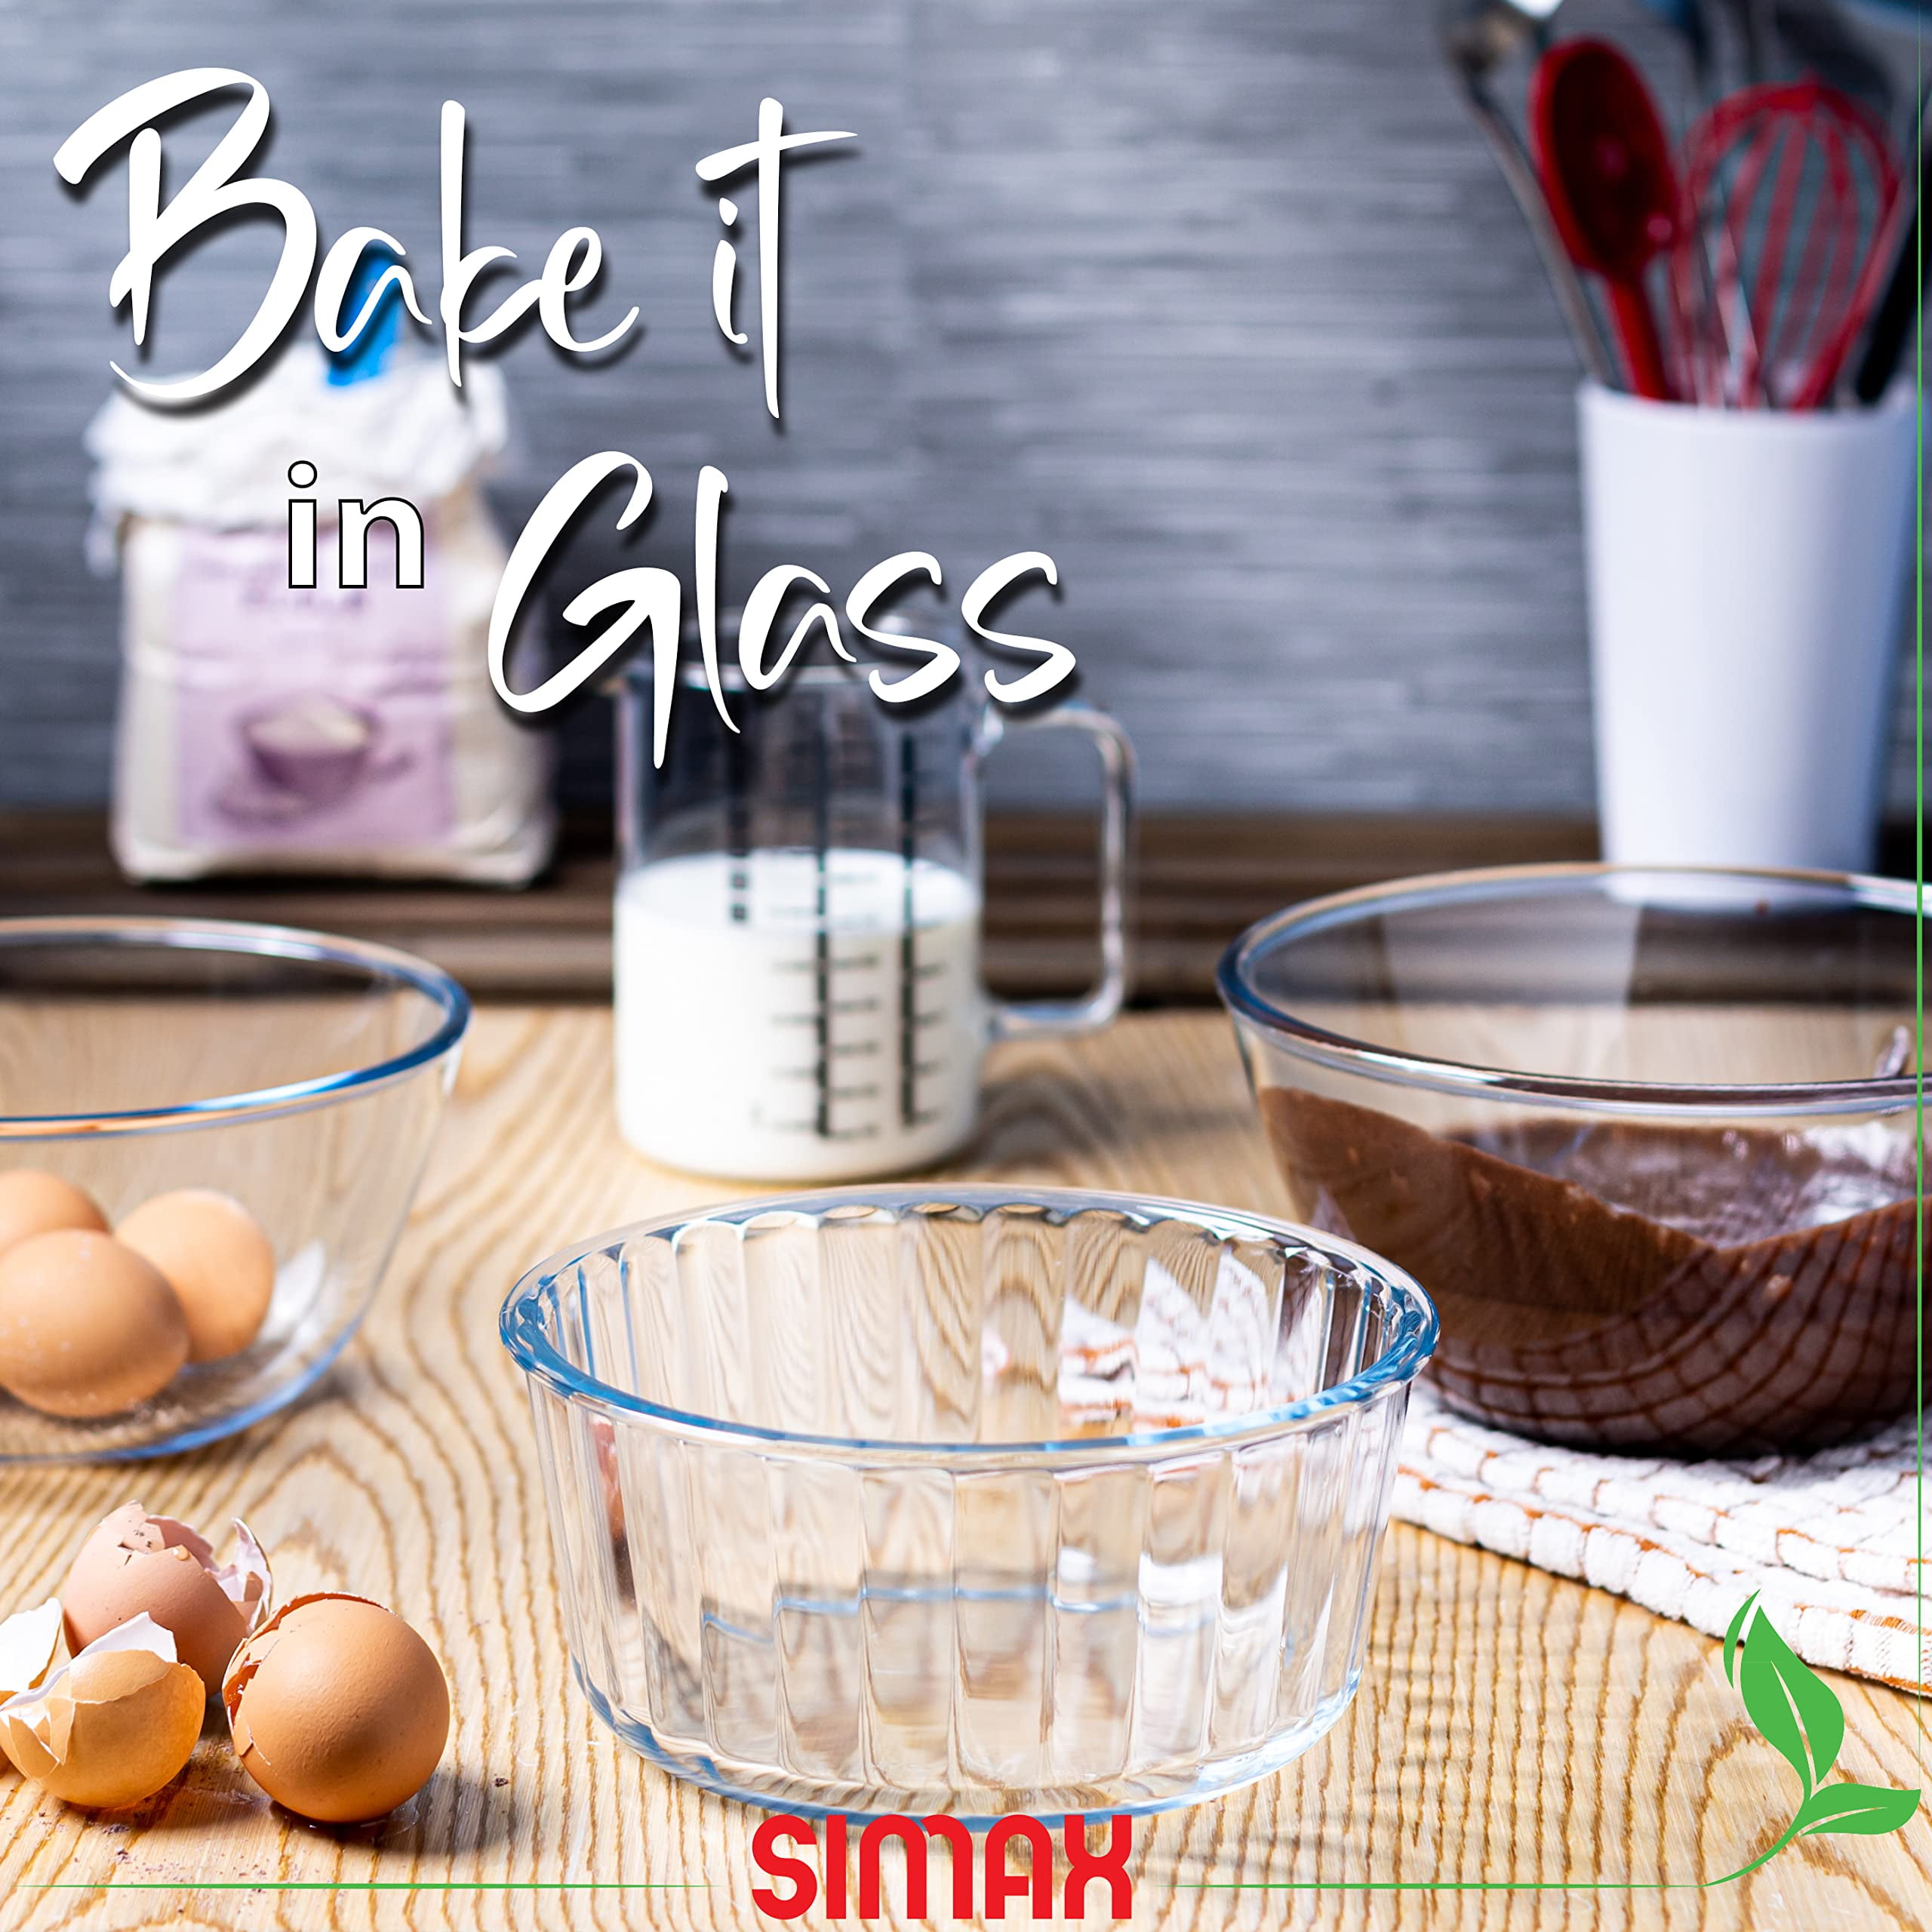 Simax Glassware 3.6 Quart (14.5 Cup) Glass Mixing Bowl | Heat, Cold, and Shock Resistant Borosilicate Glass, Dishwasher and Microwave Safe, Made in